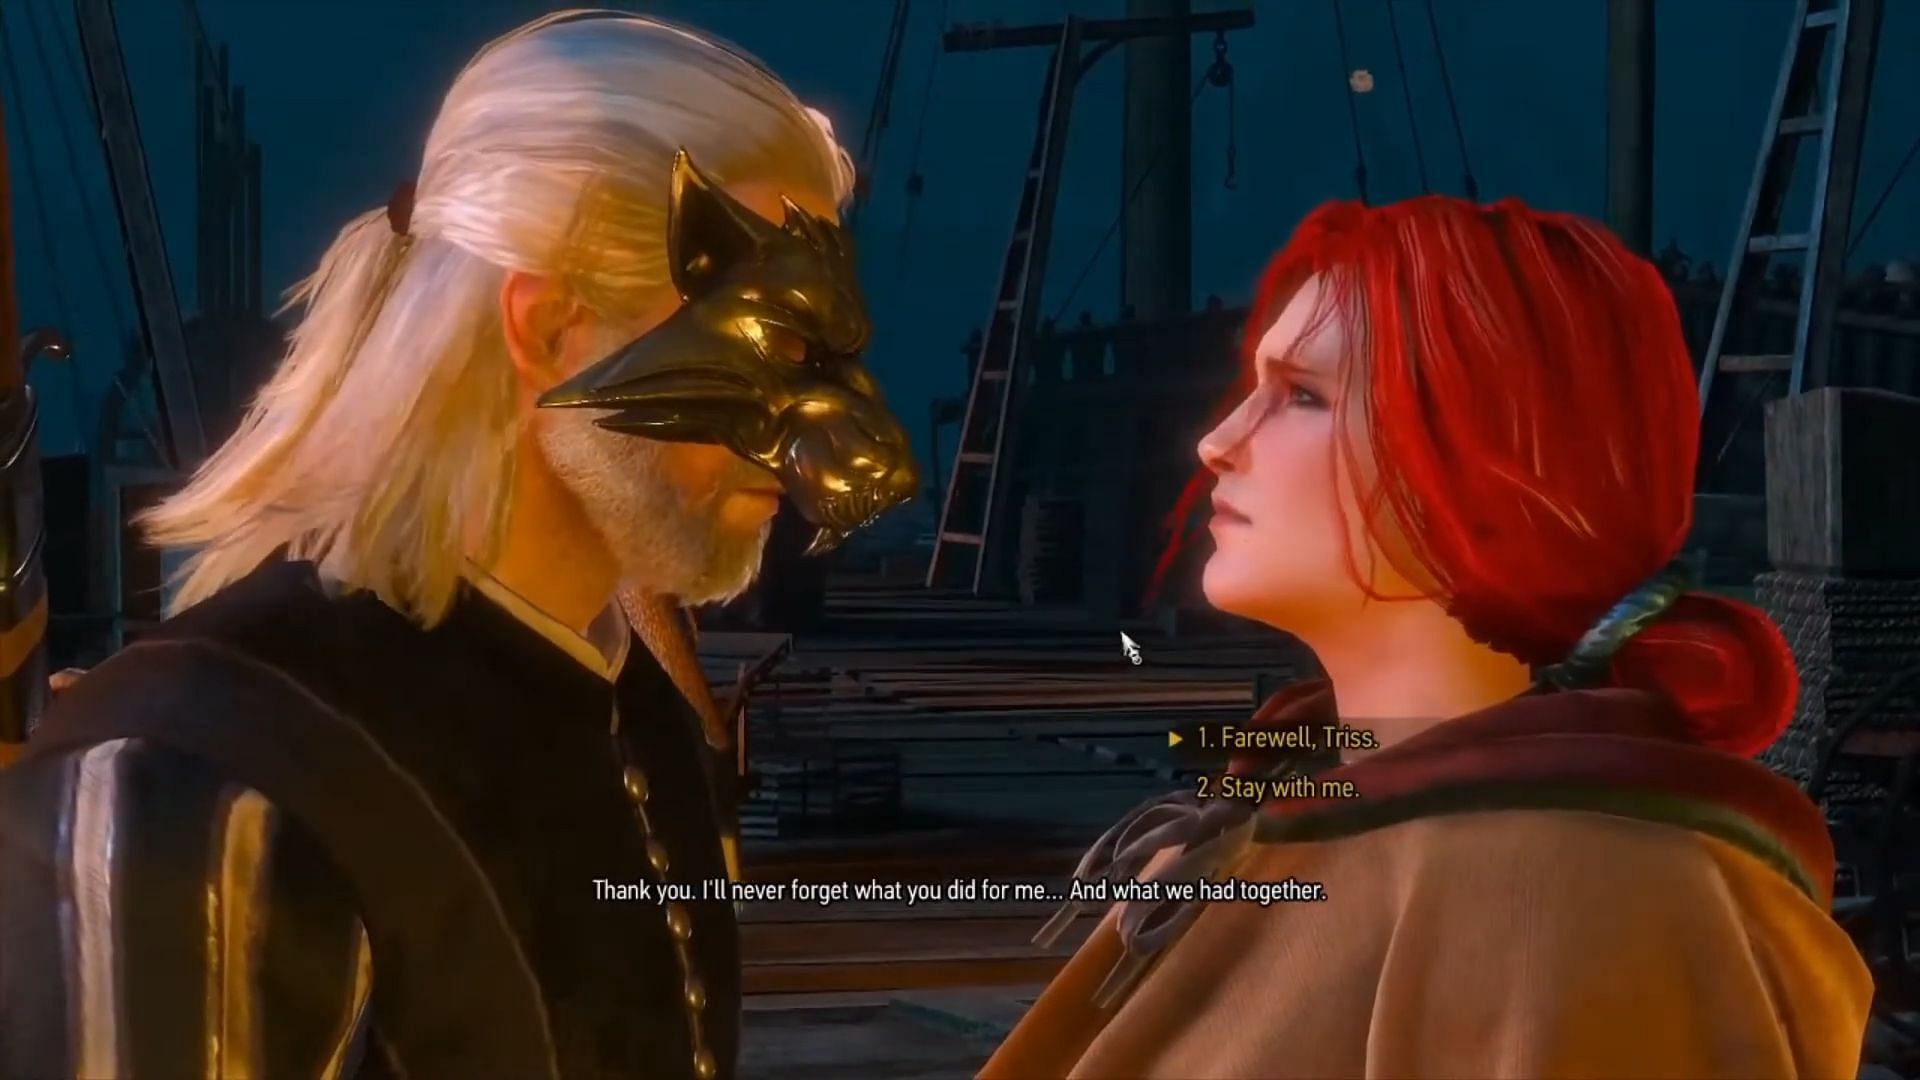 Romancing Triss in The Witcher 3 (Image via CD Projekt Red || YouTube/Resting Inn)